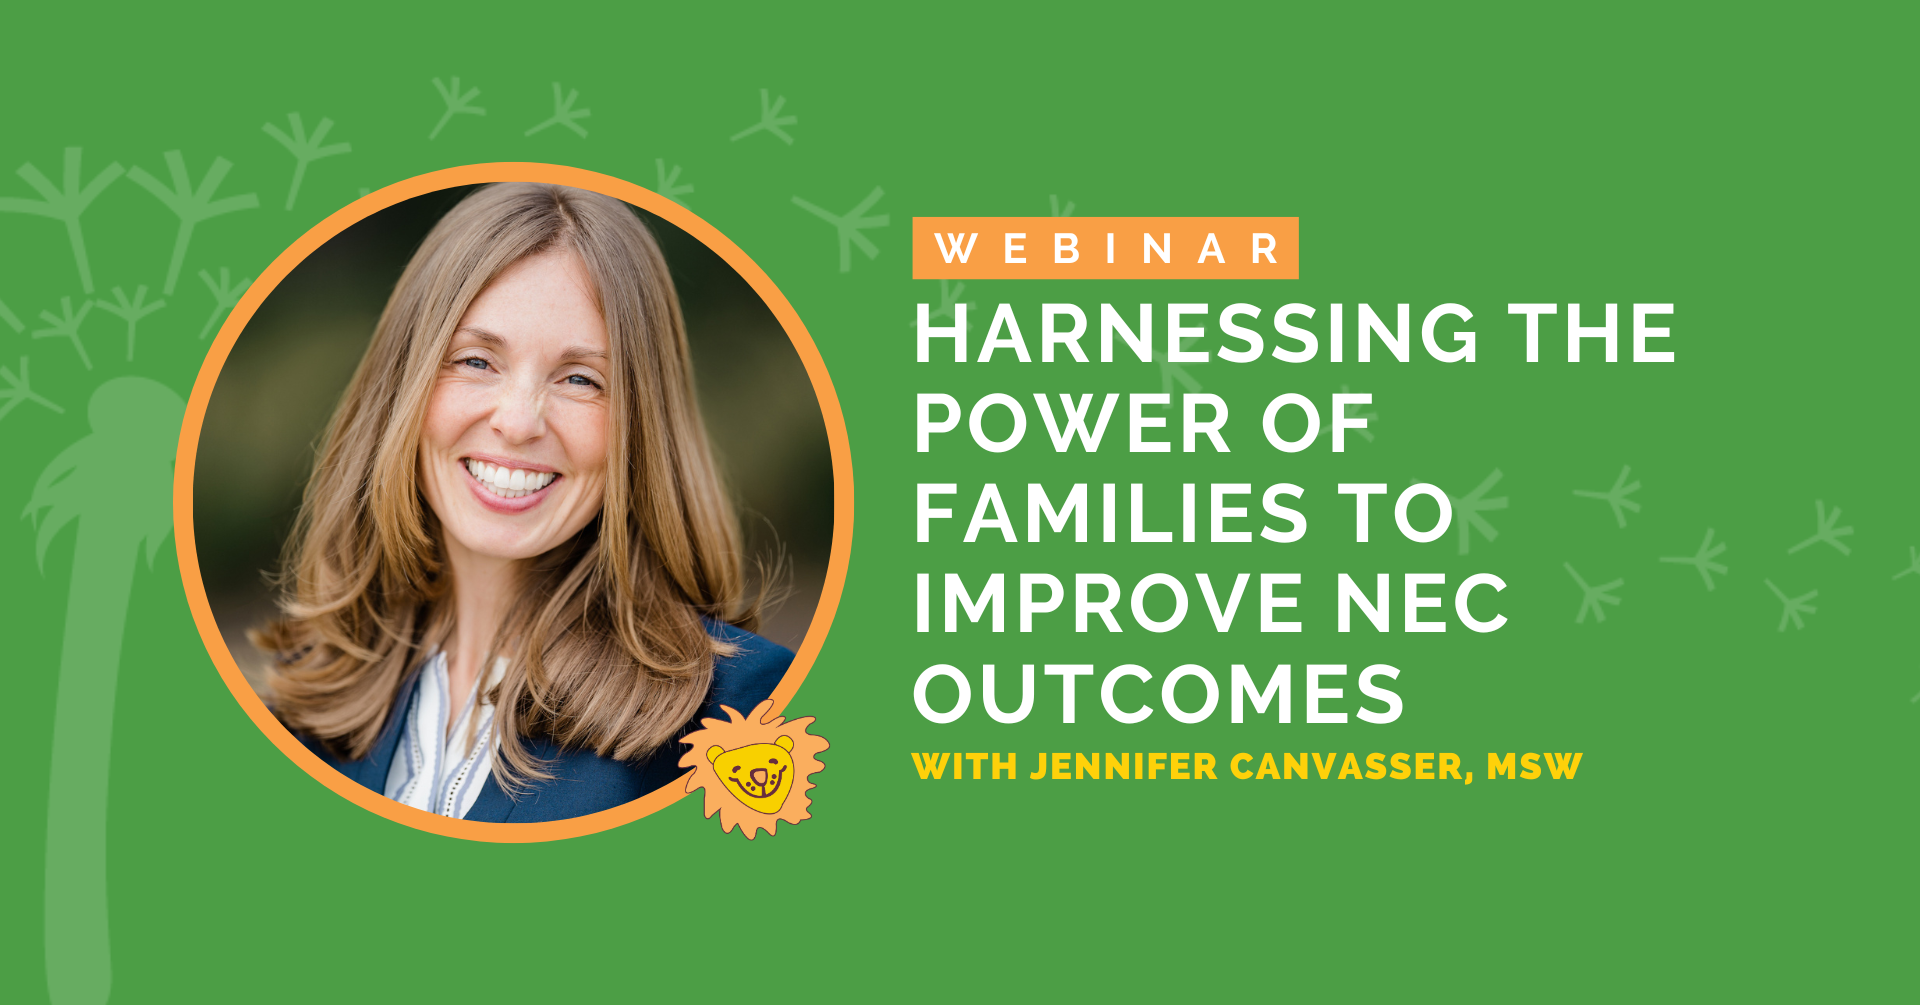 Harnessing The Power of Families To Improve NEC Outcomes - Dandle•LION ...